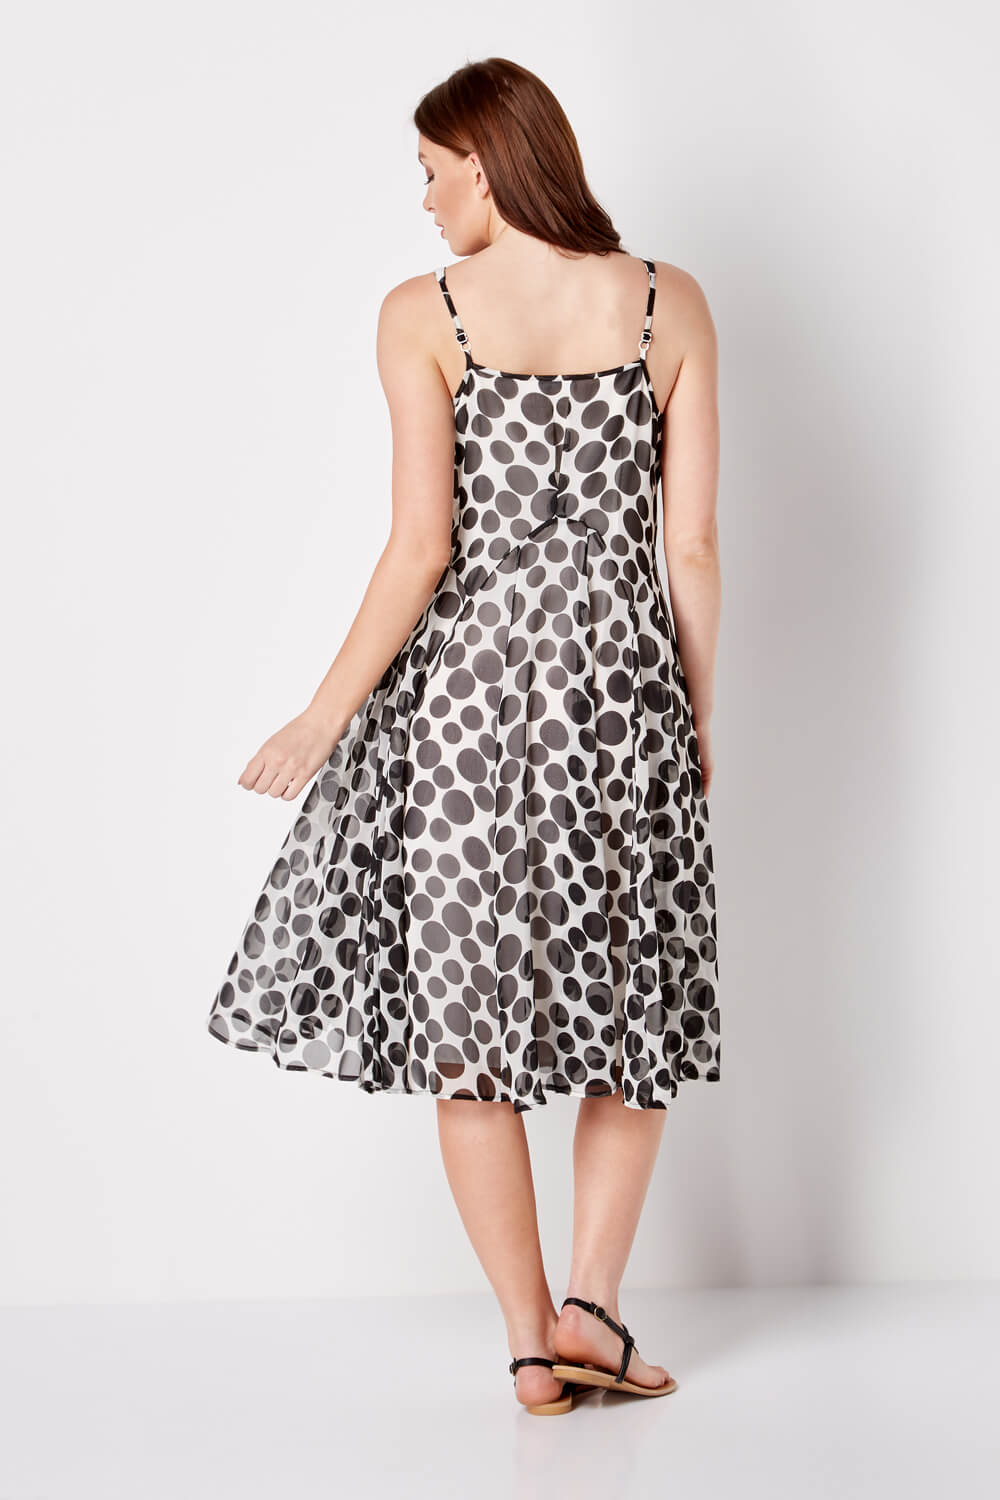 Ivory  Spot Print Fit and Flare Dress, Image 2 of 4